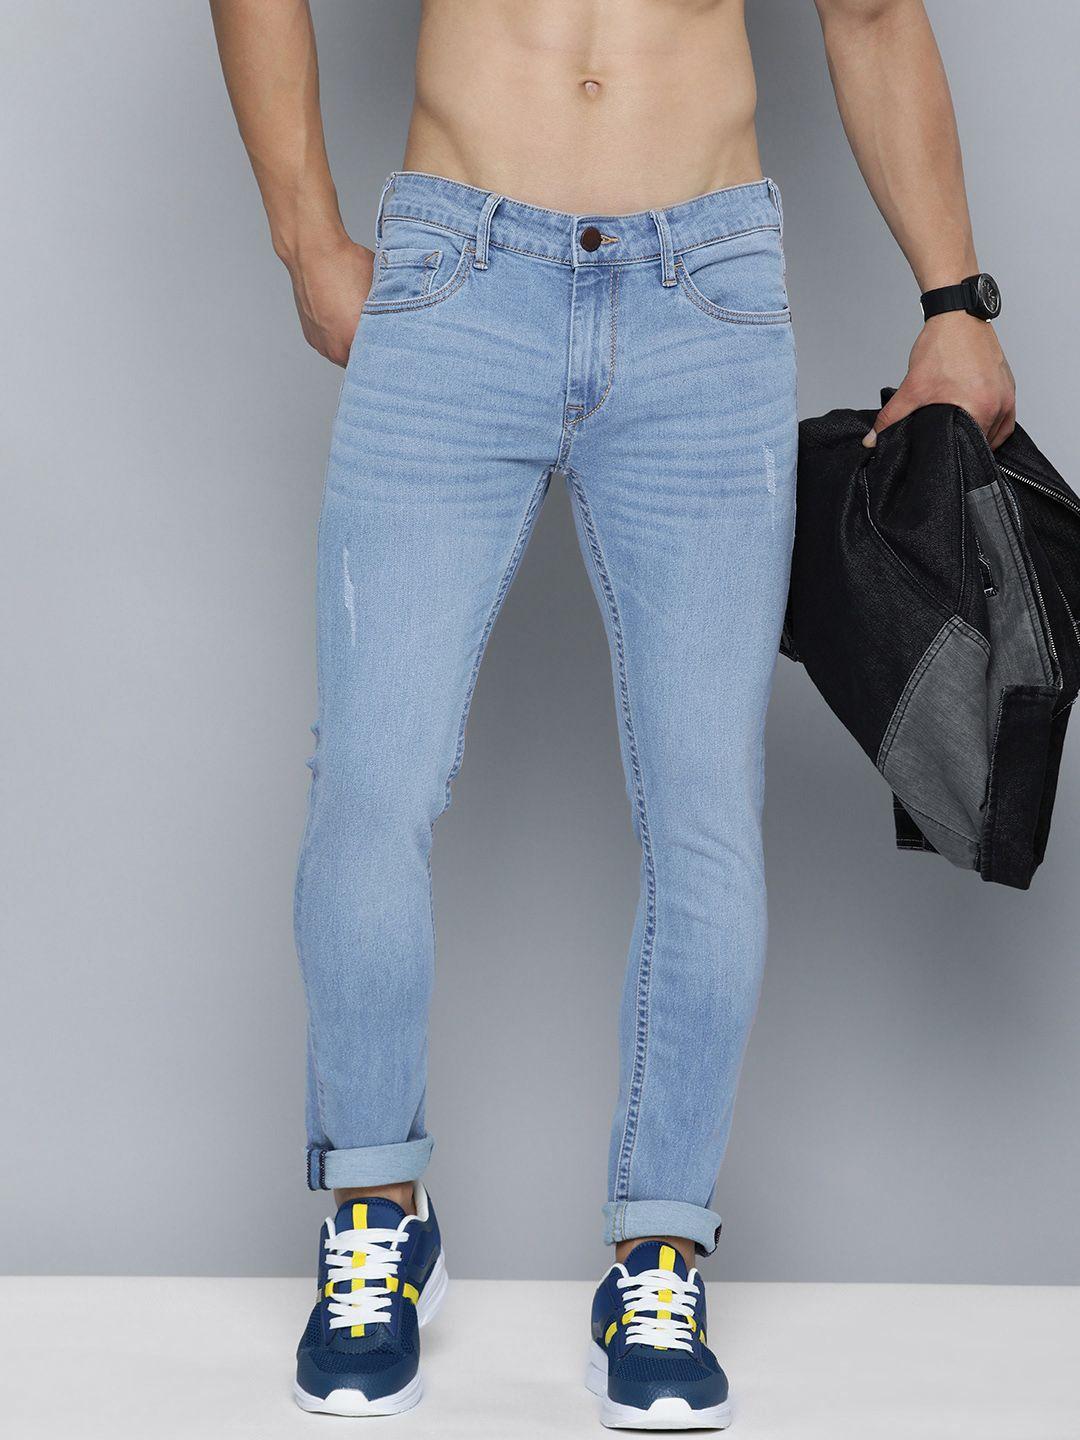 here&now men skinny fit light fade stretchable mid rise jeans